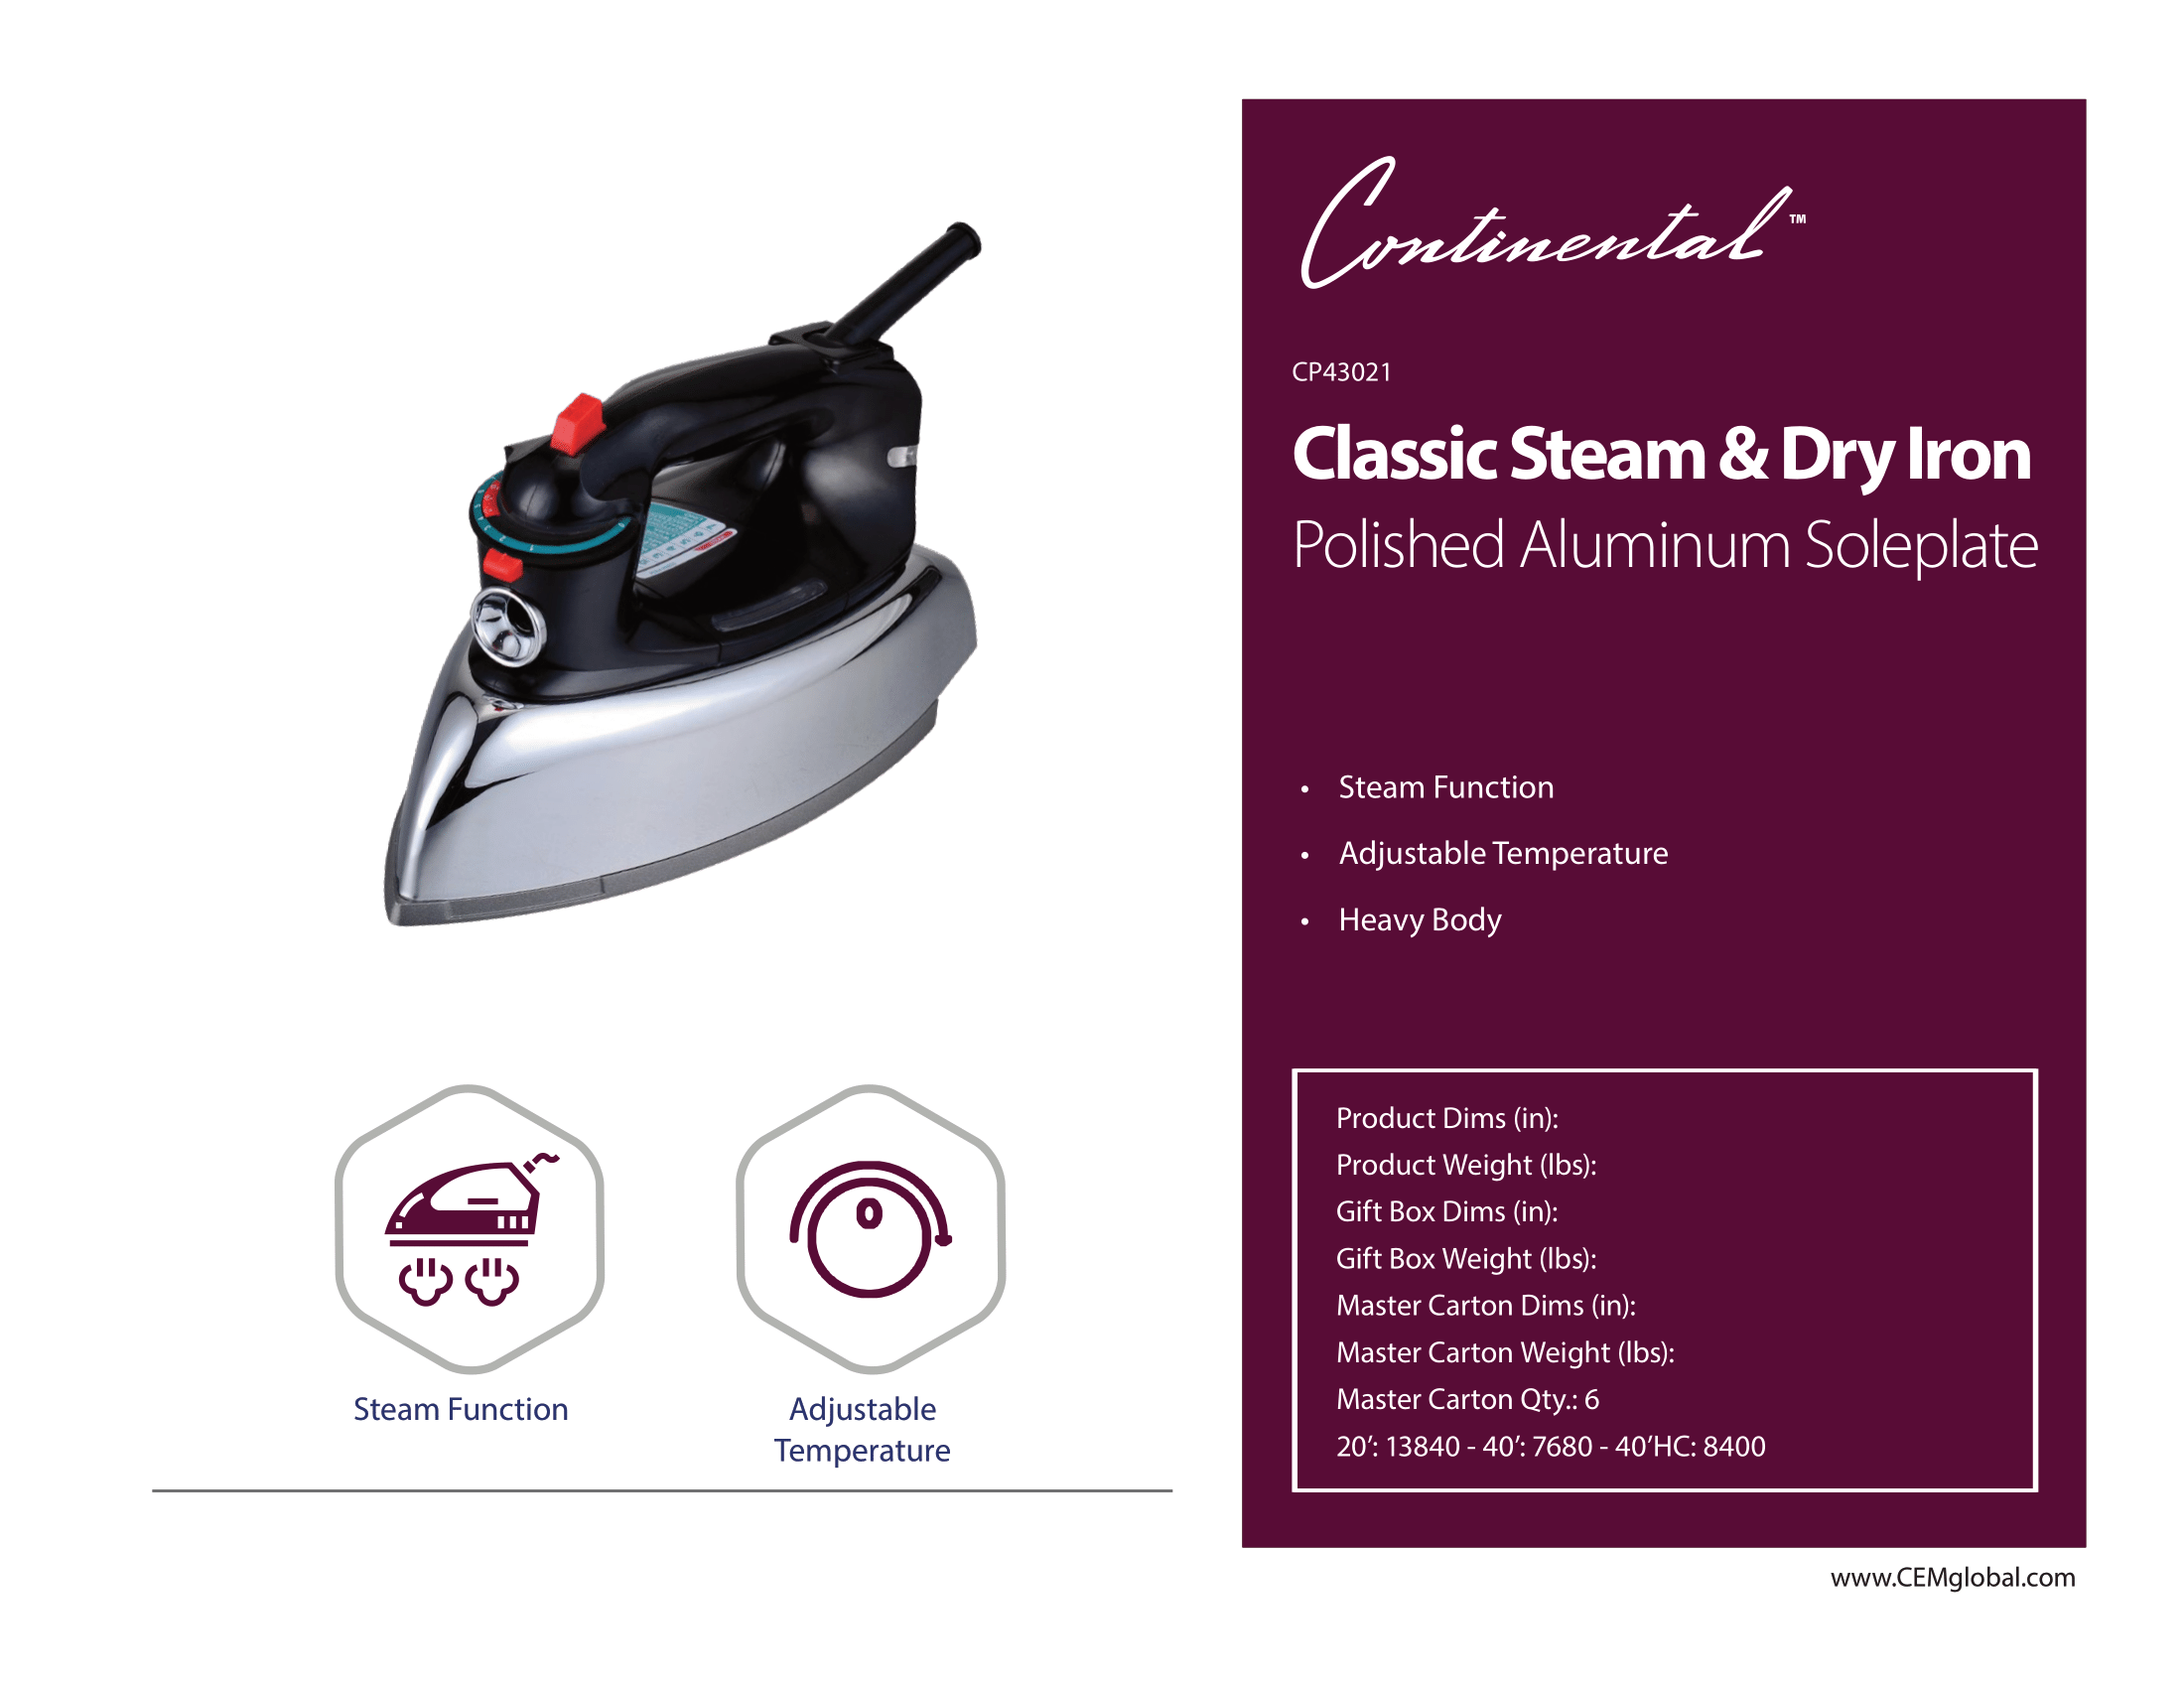 Classic Steam & Dry Iron Polished Aluminum Soleplate